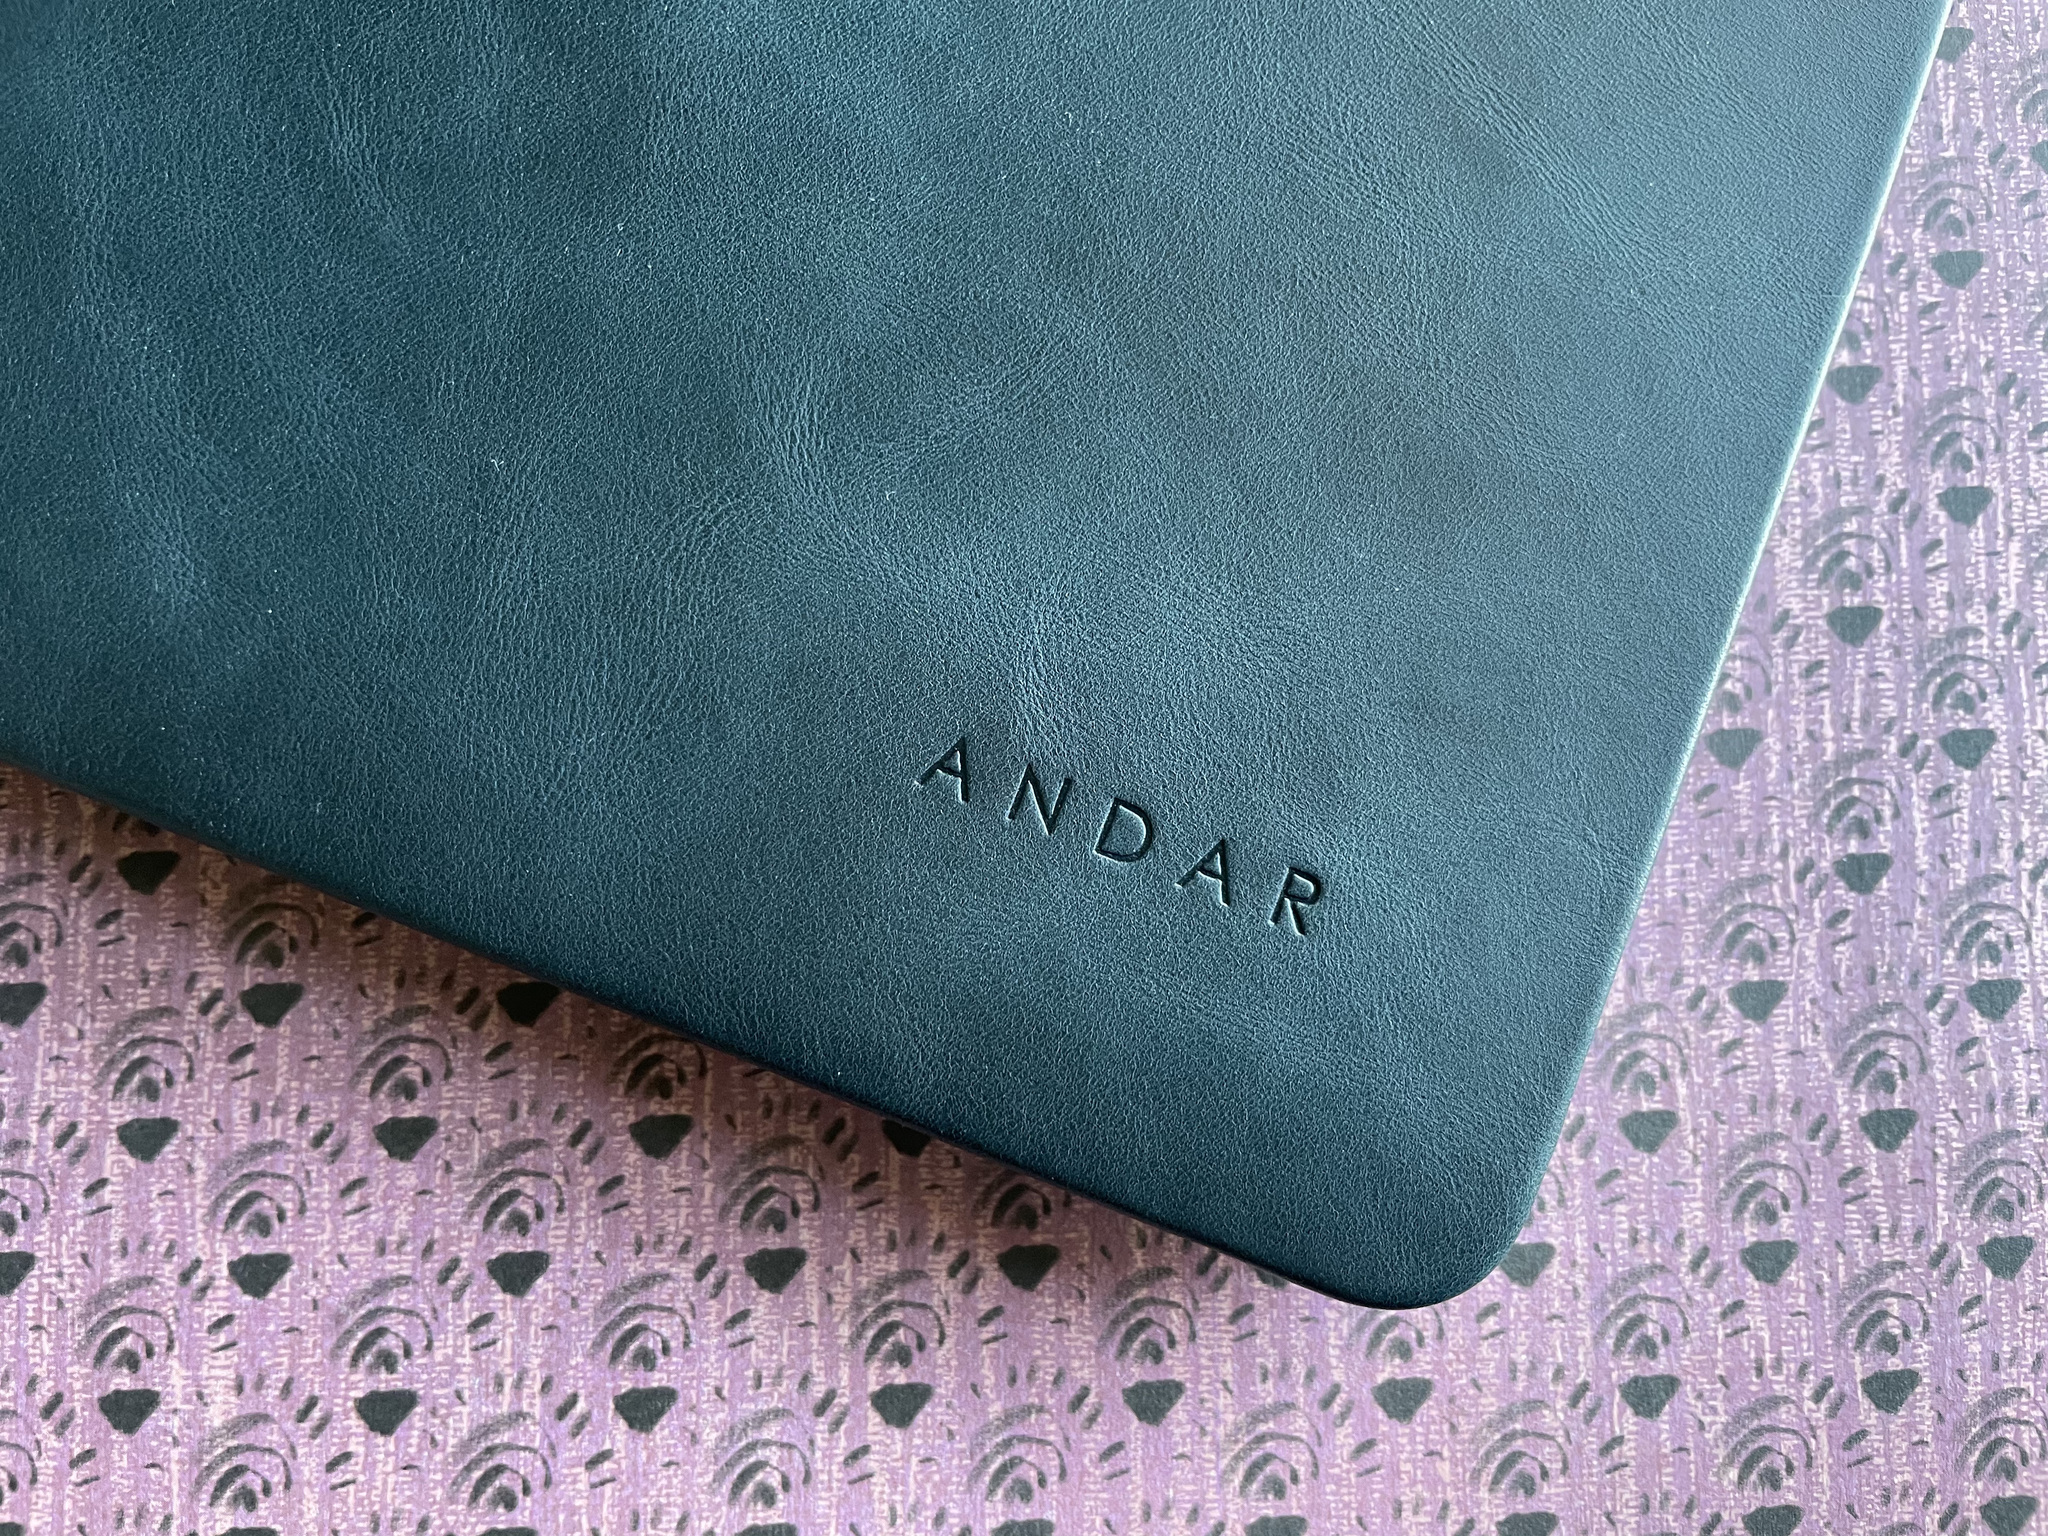 Nomad's luxe leather sleeve for MacBook Pro review: as good as it